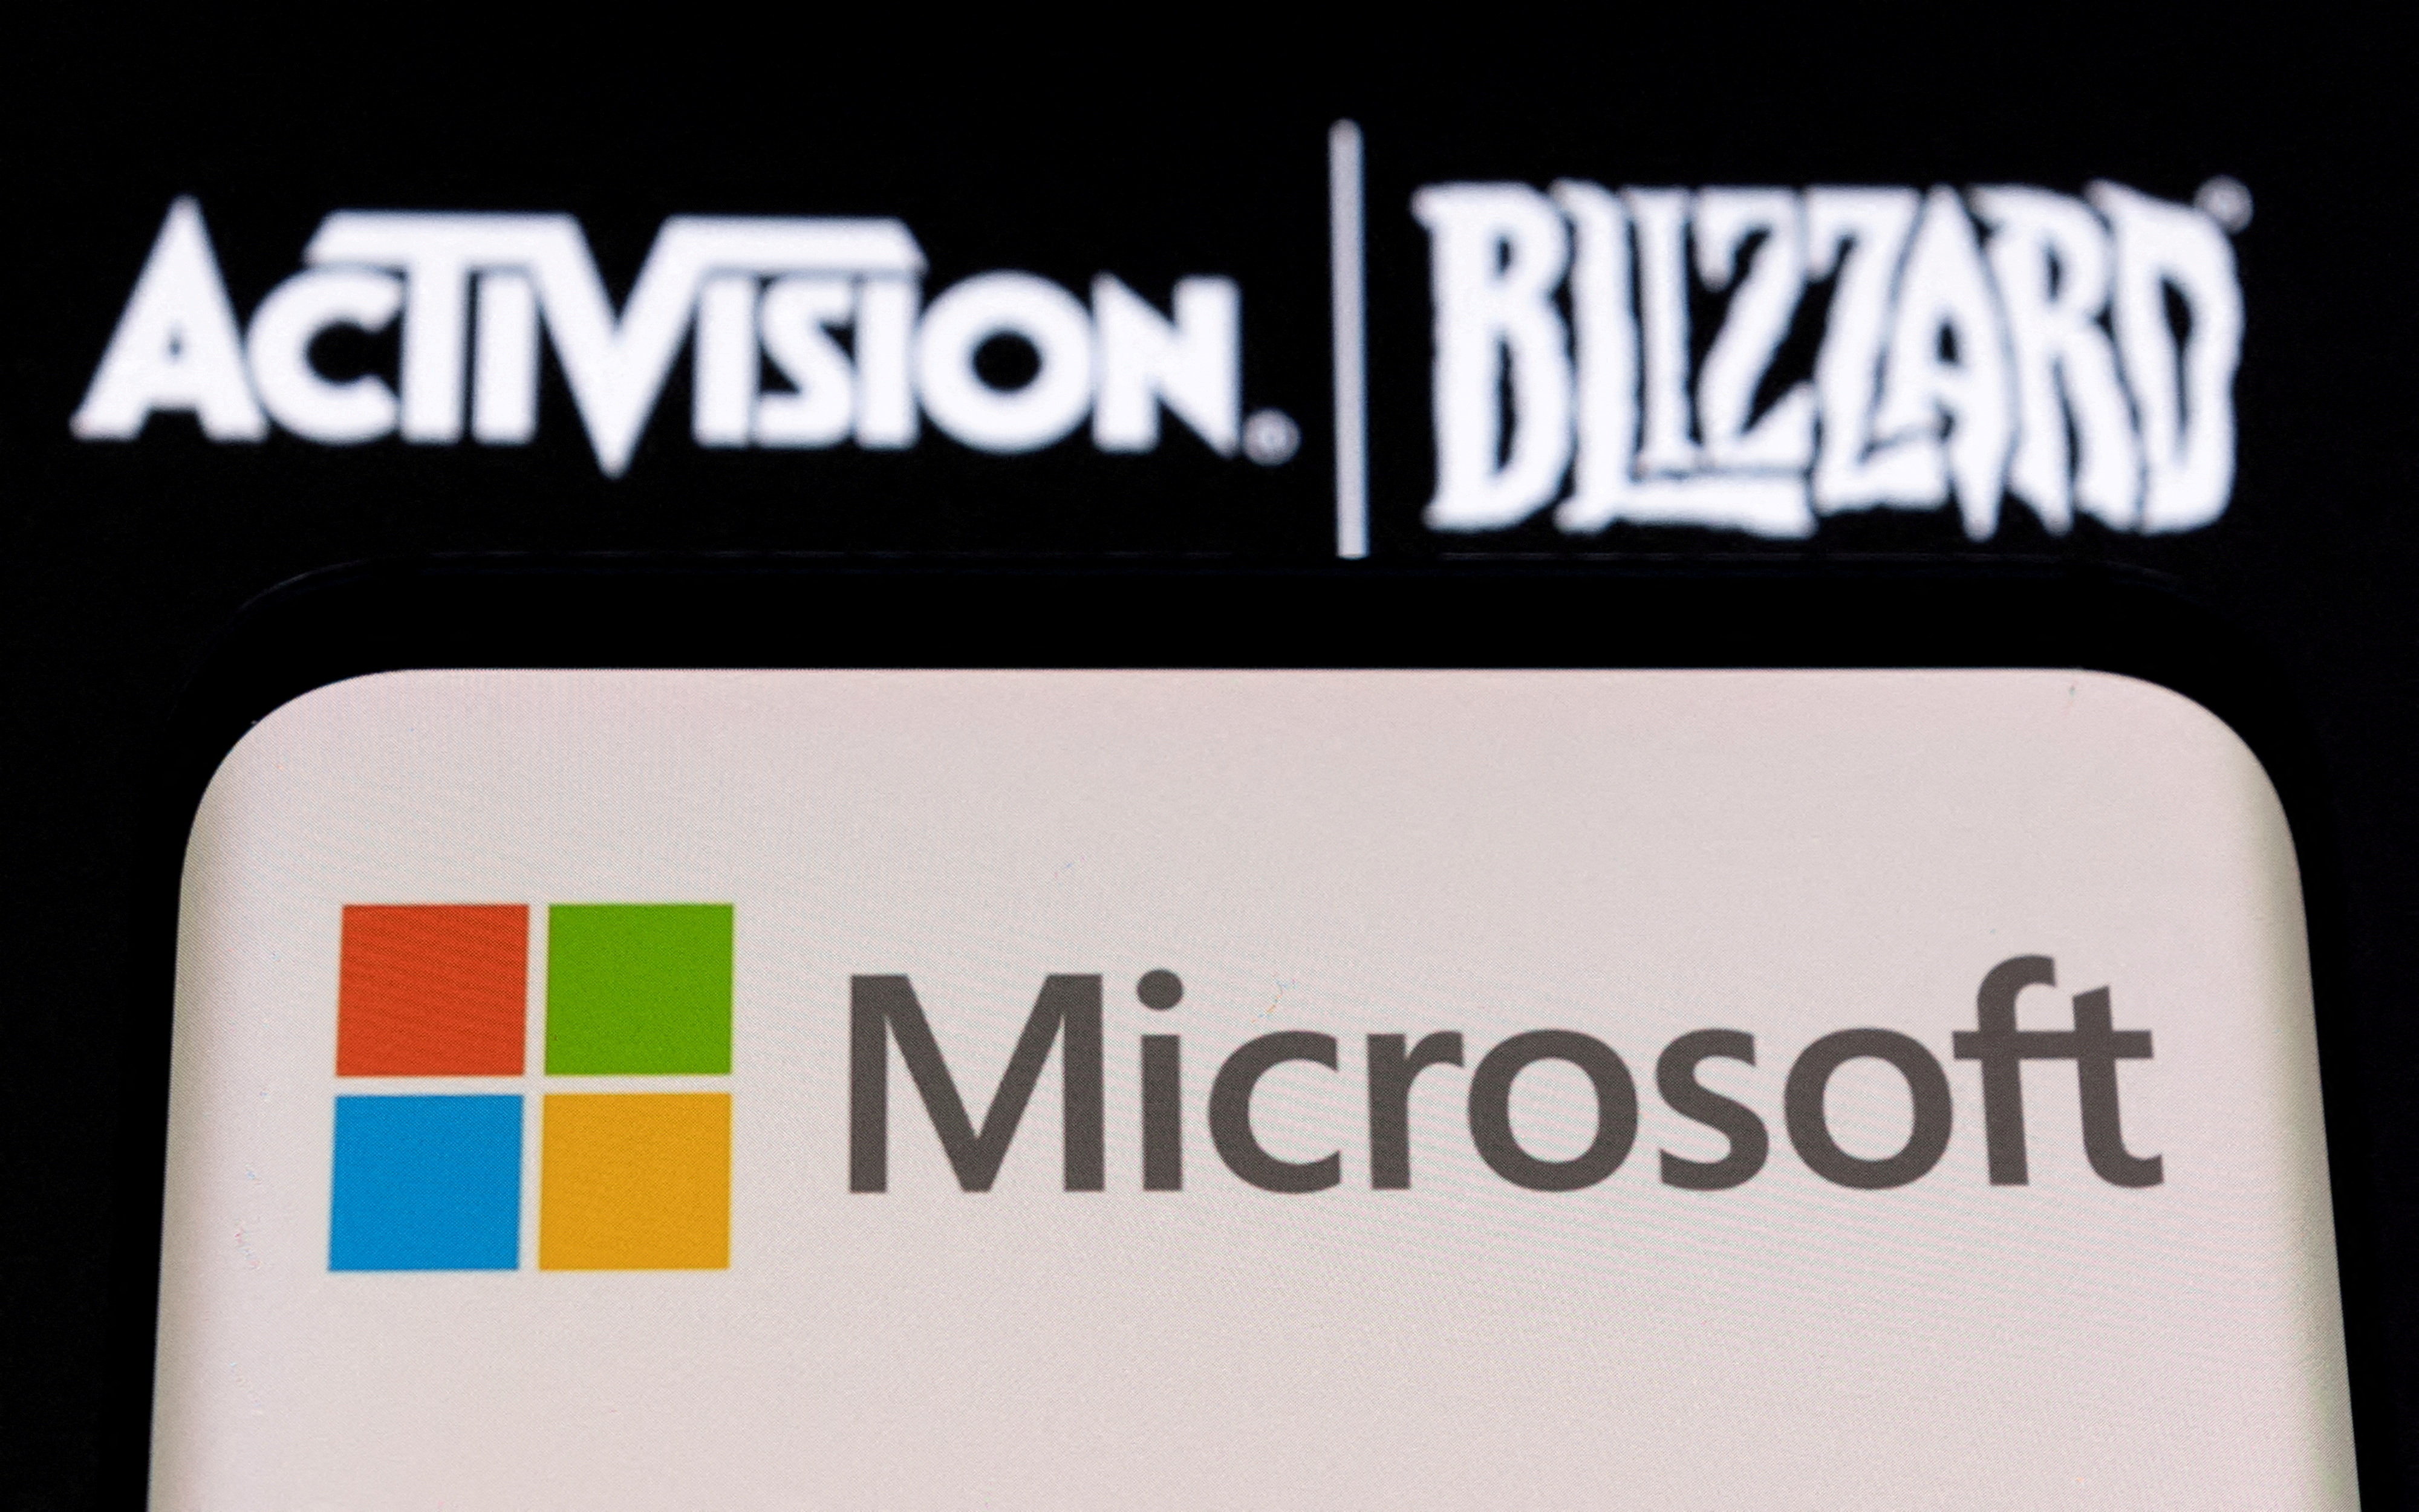 Microsoft, Activision Eye UK Rights Sale to Get Merger Done